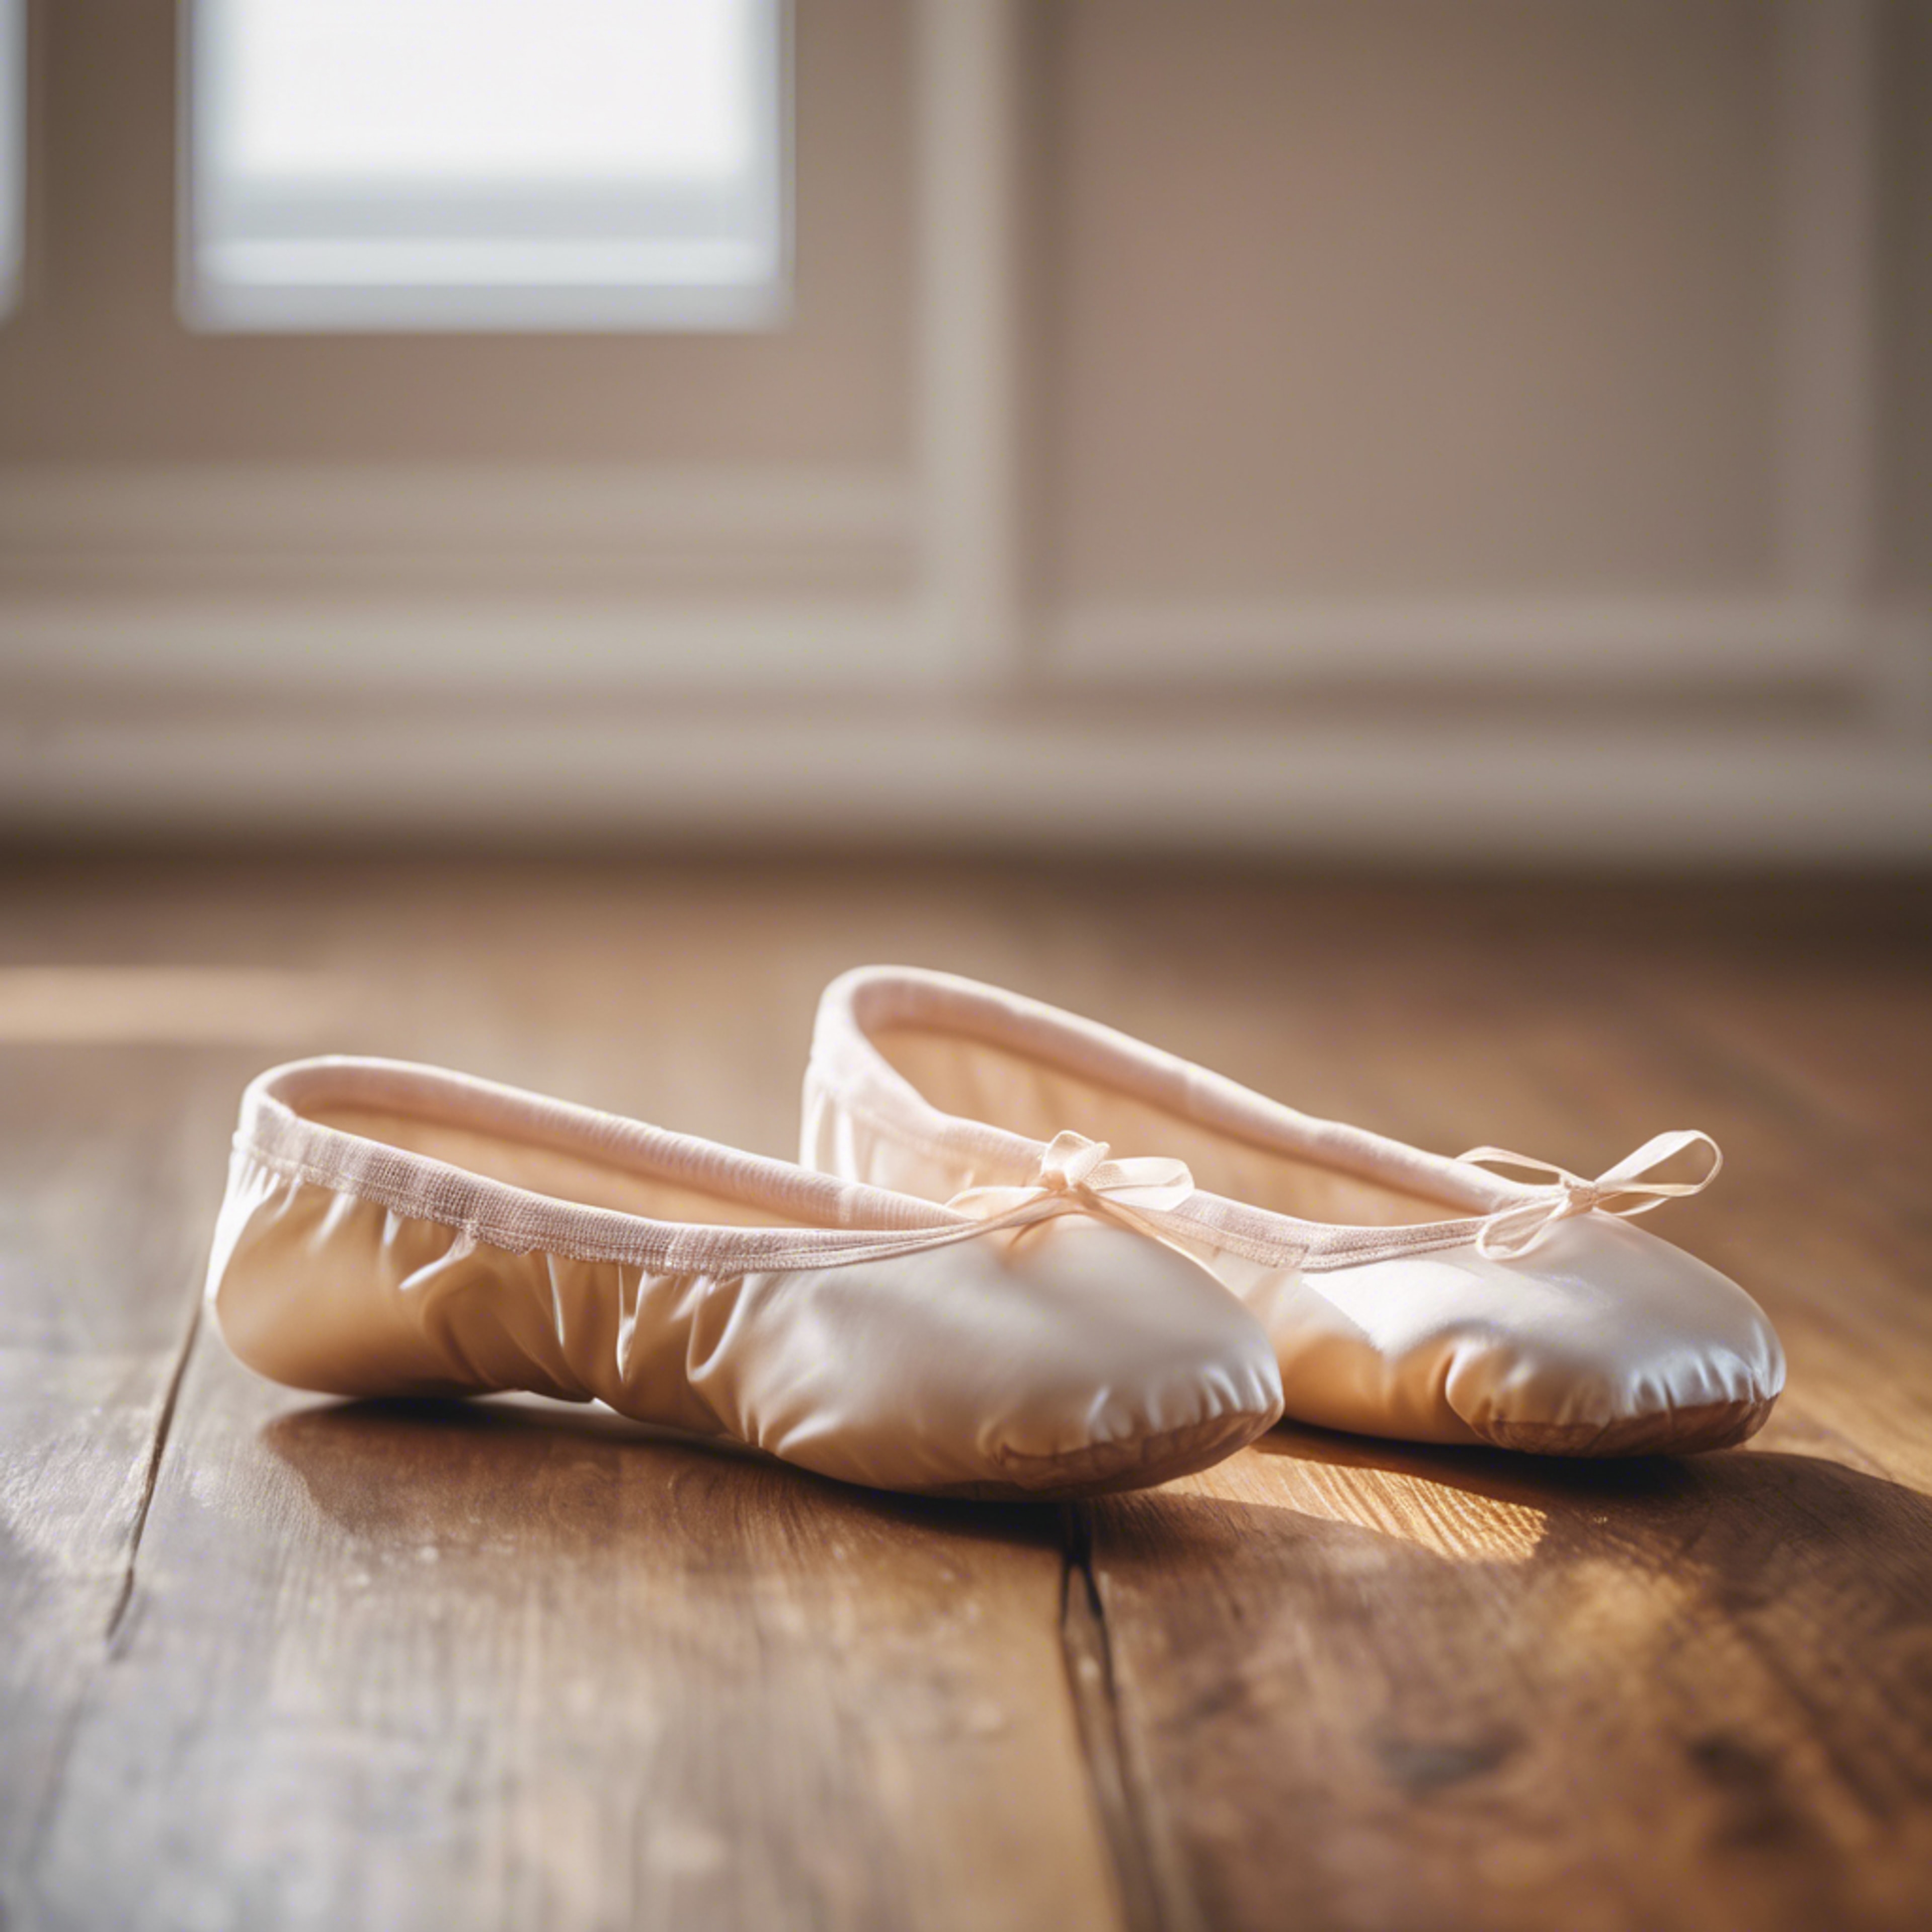 Close up of a pair of cream-colored ballet slippers on a hardwood floor. Papel de parede[4efd7208256149a9b923]